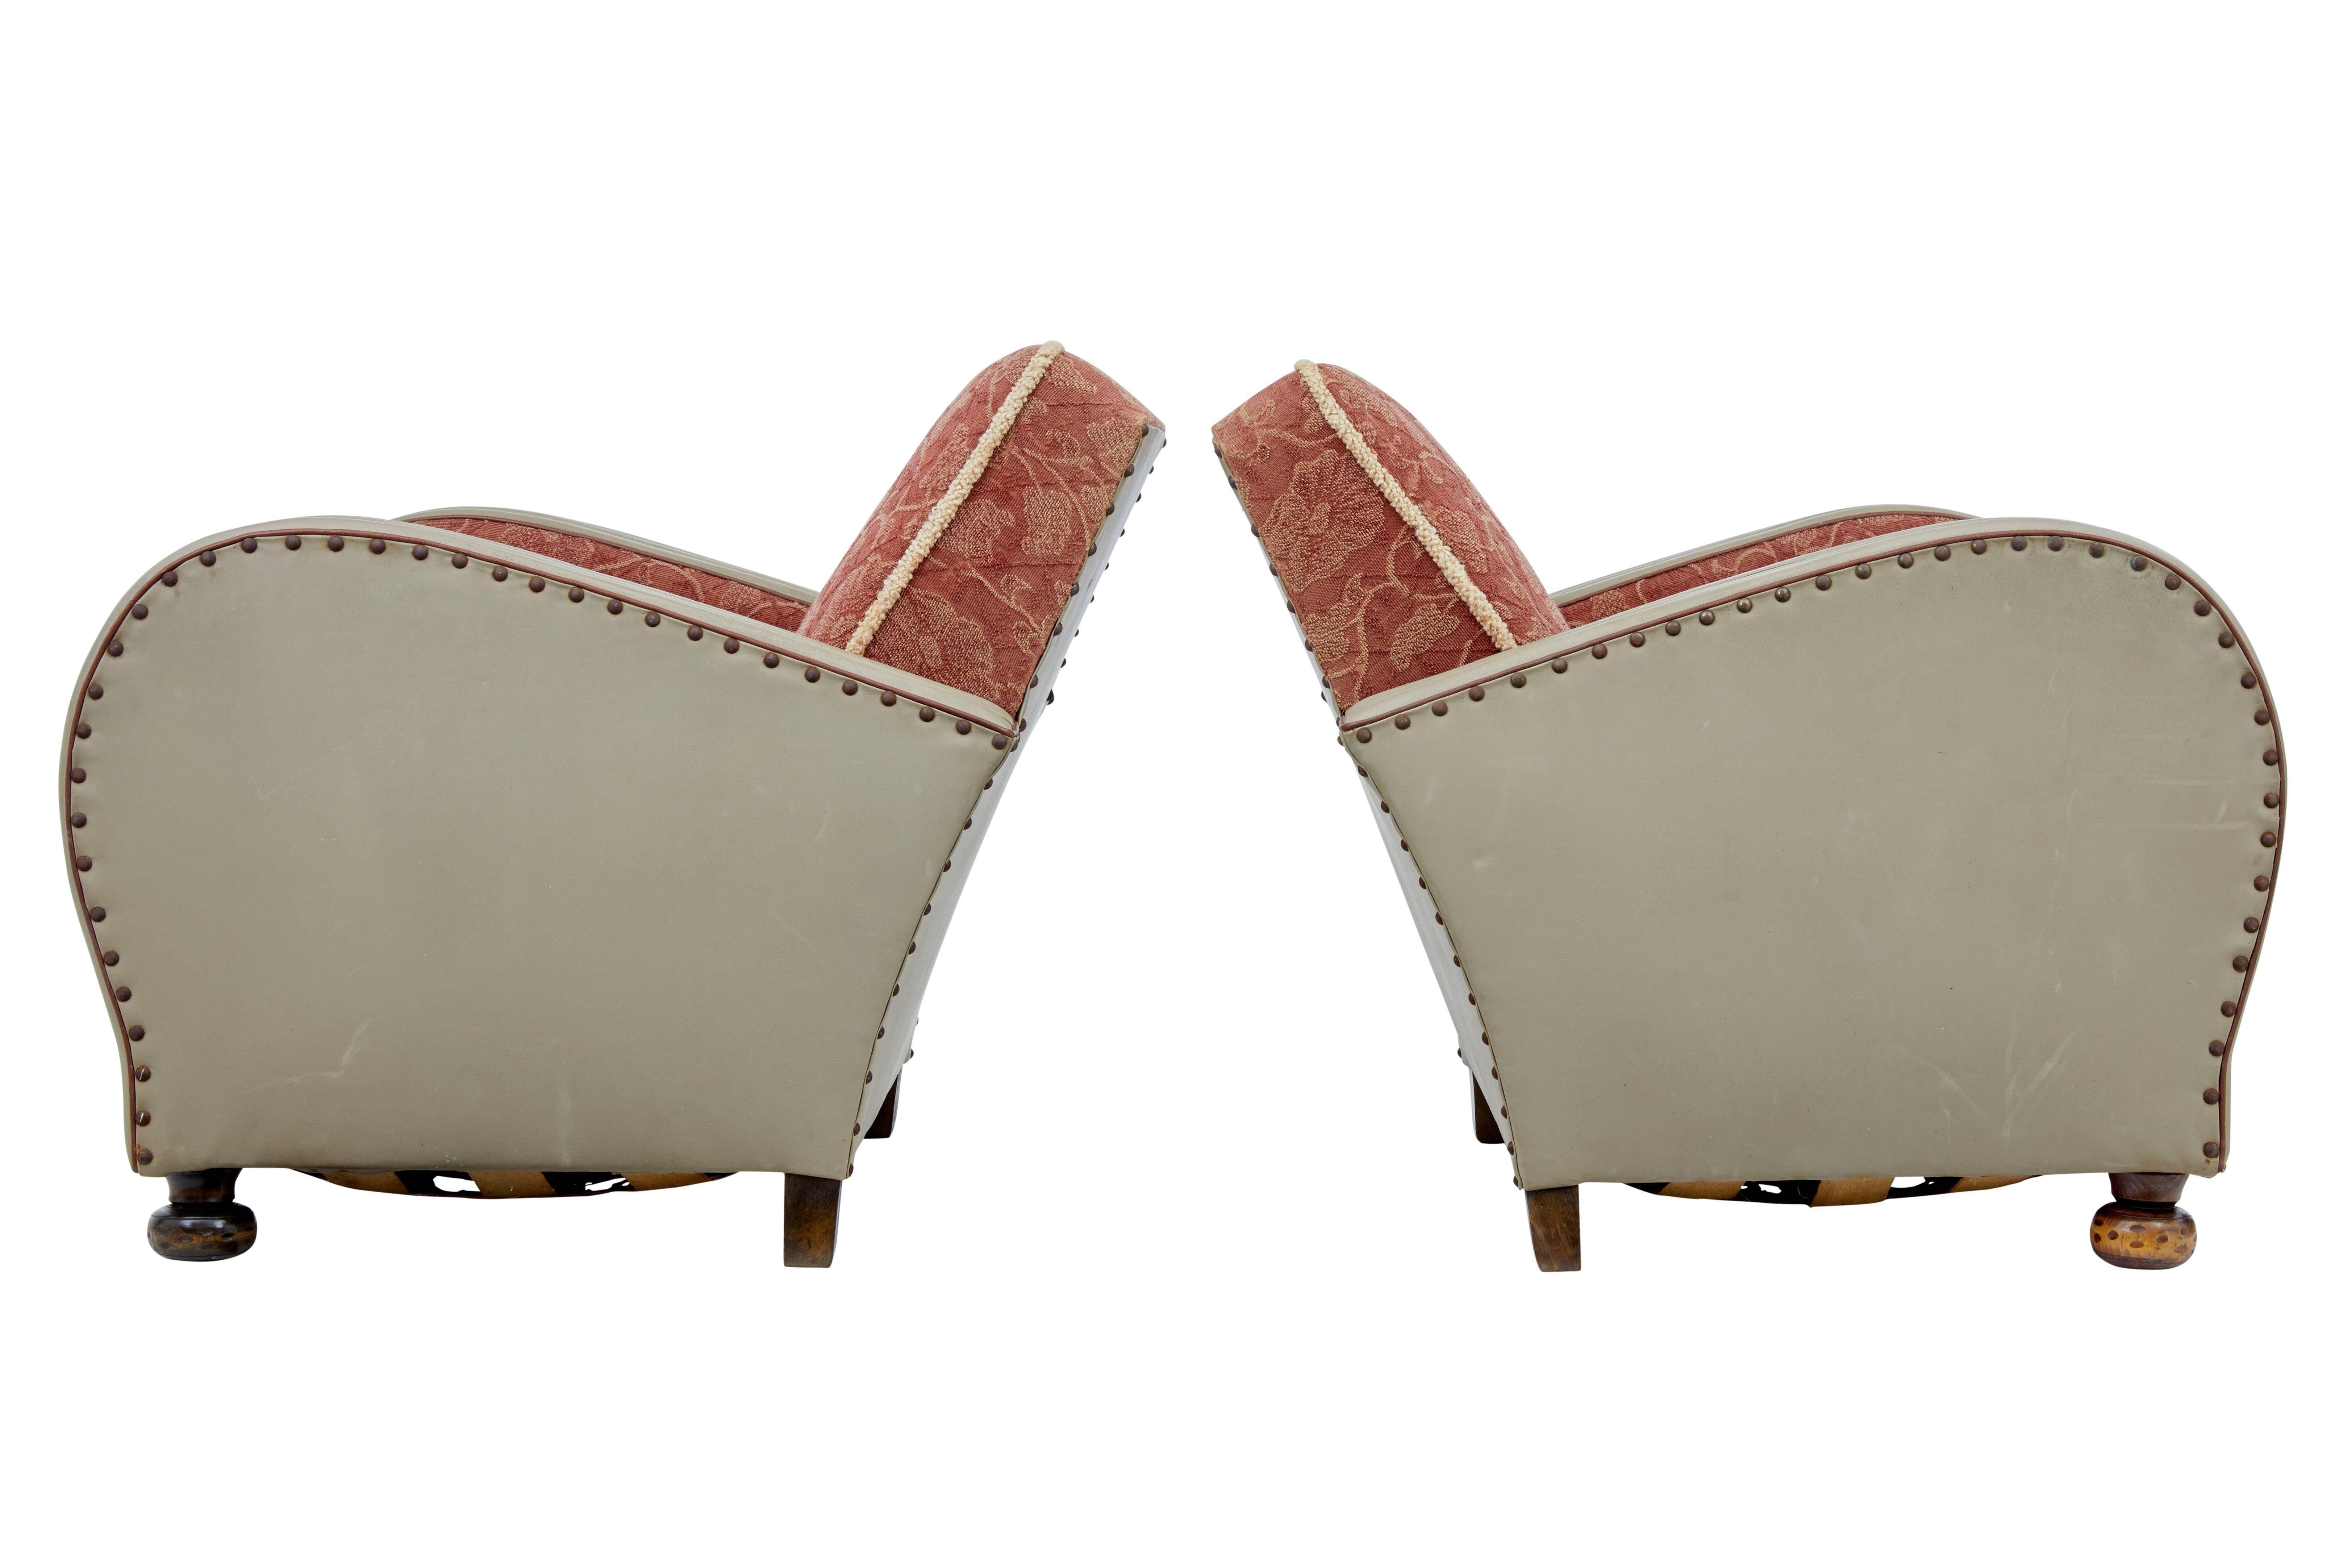 Good quality pair of period deco armchairs, circa 1920.
Typical Classic Art Deco flowing arms. Grey leather with red leather piping, floral material to back, seat and inner arms.
Standing on front bun feet.
Original leather is in good condition